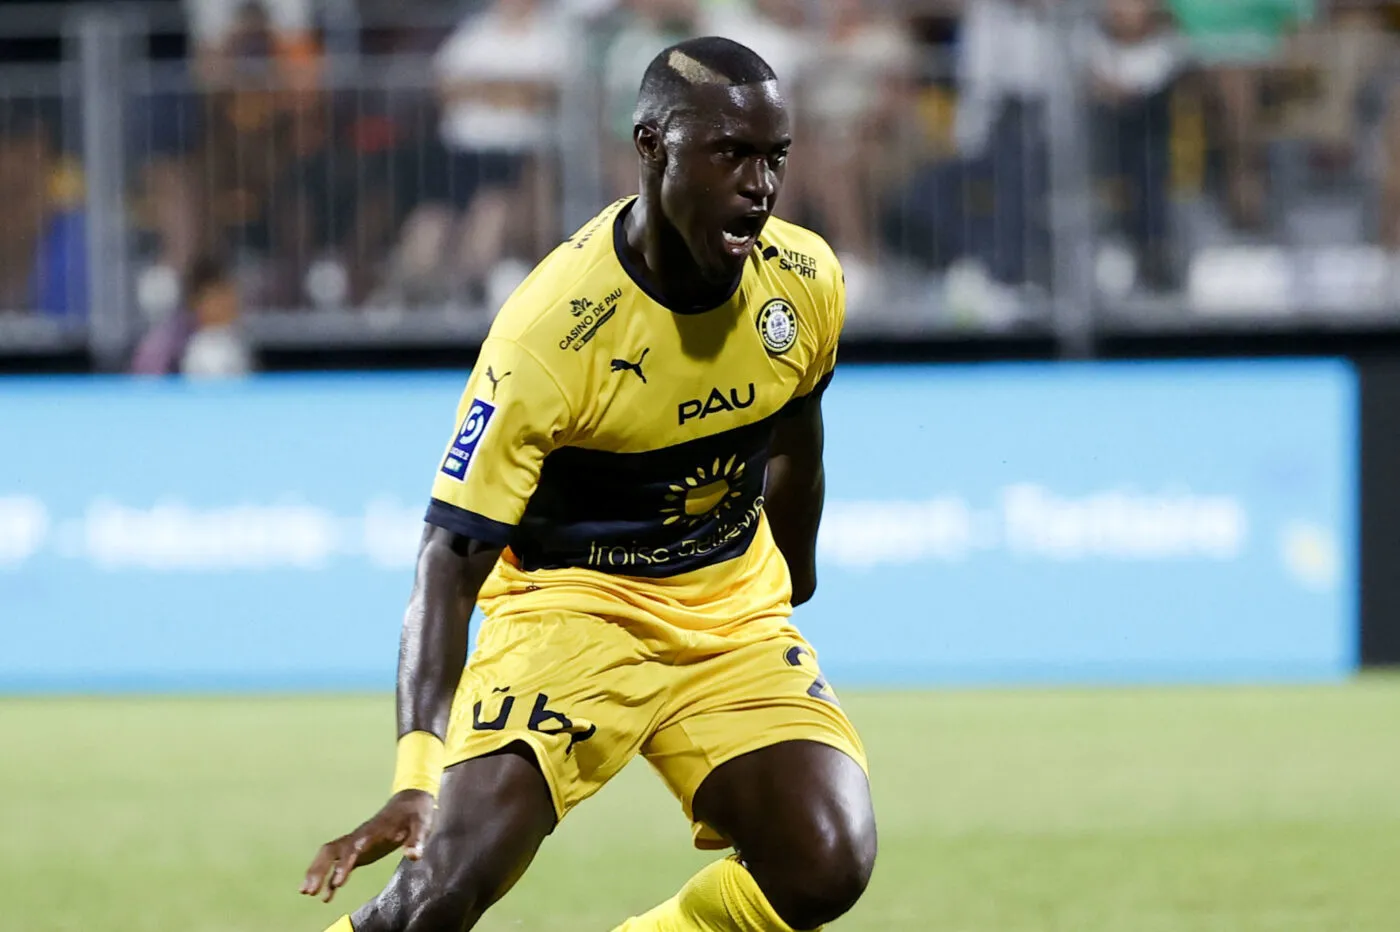 20 Henri SAIVET (pau) during the Ligue 2 BKT match between Pau and Saint Etienne on September 5, 2022 in Pau, France. (Photo by Romain Perrocheau/FEP/Icon Sport) - Photo by Icon sport